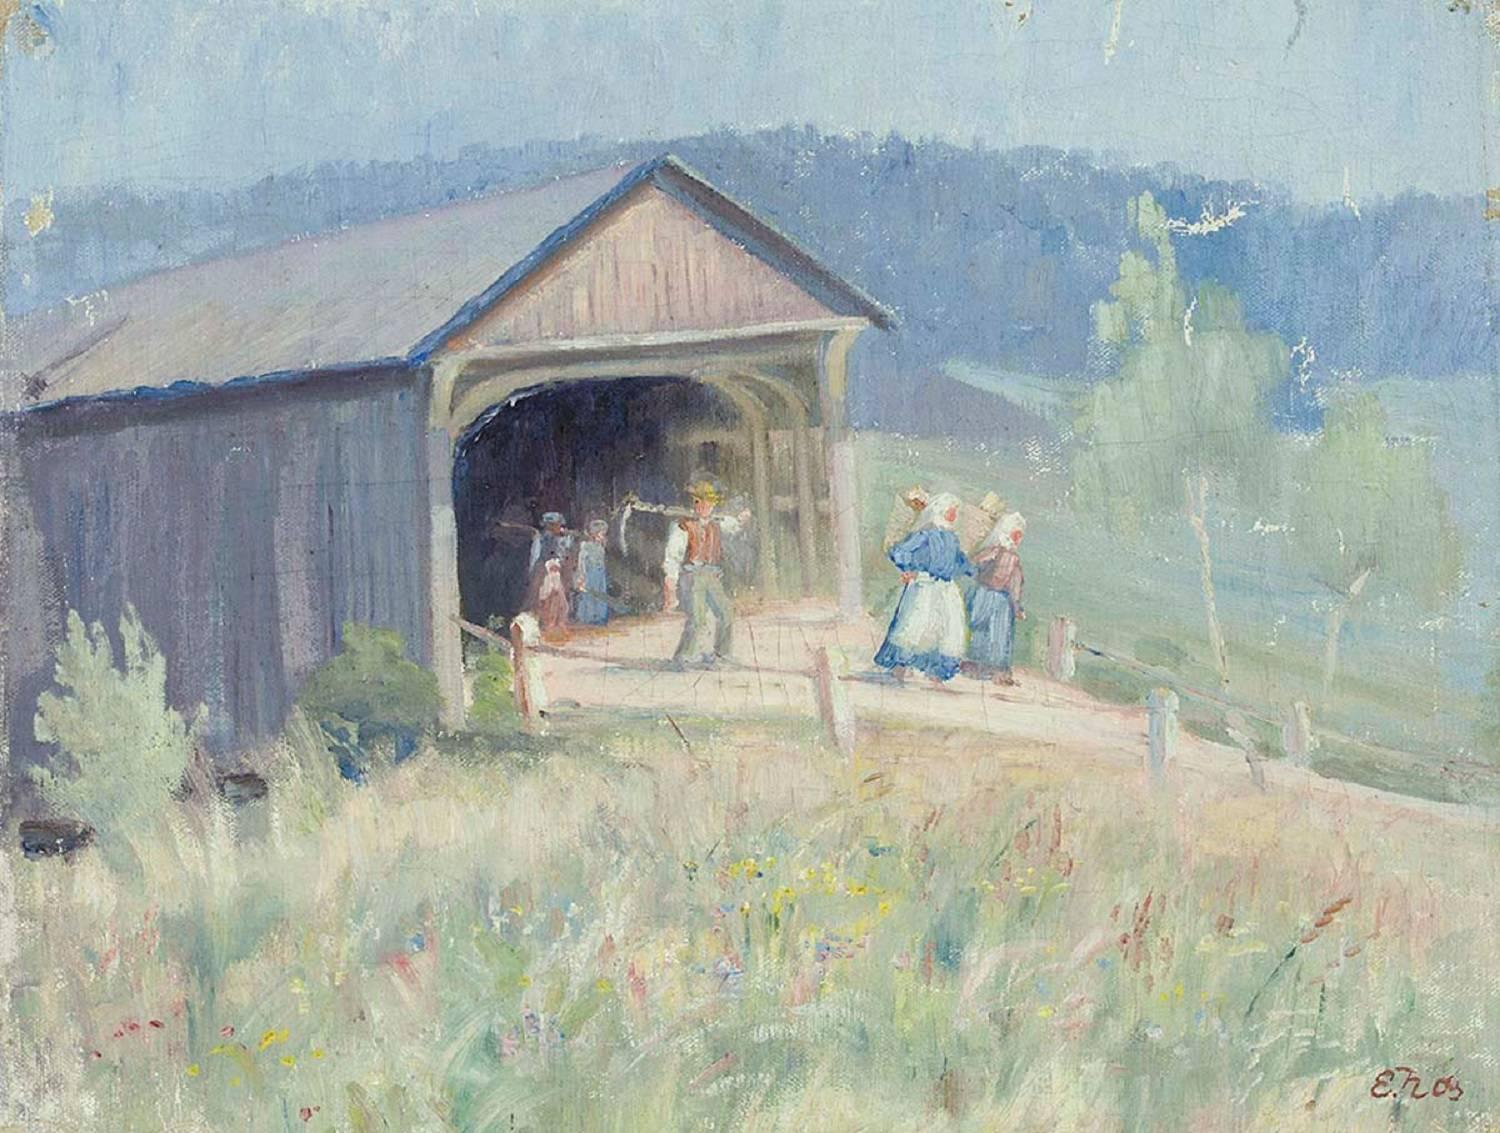 Unknown Landscape Painting - Family of Farmers by the Barn